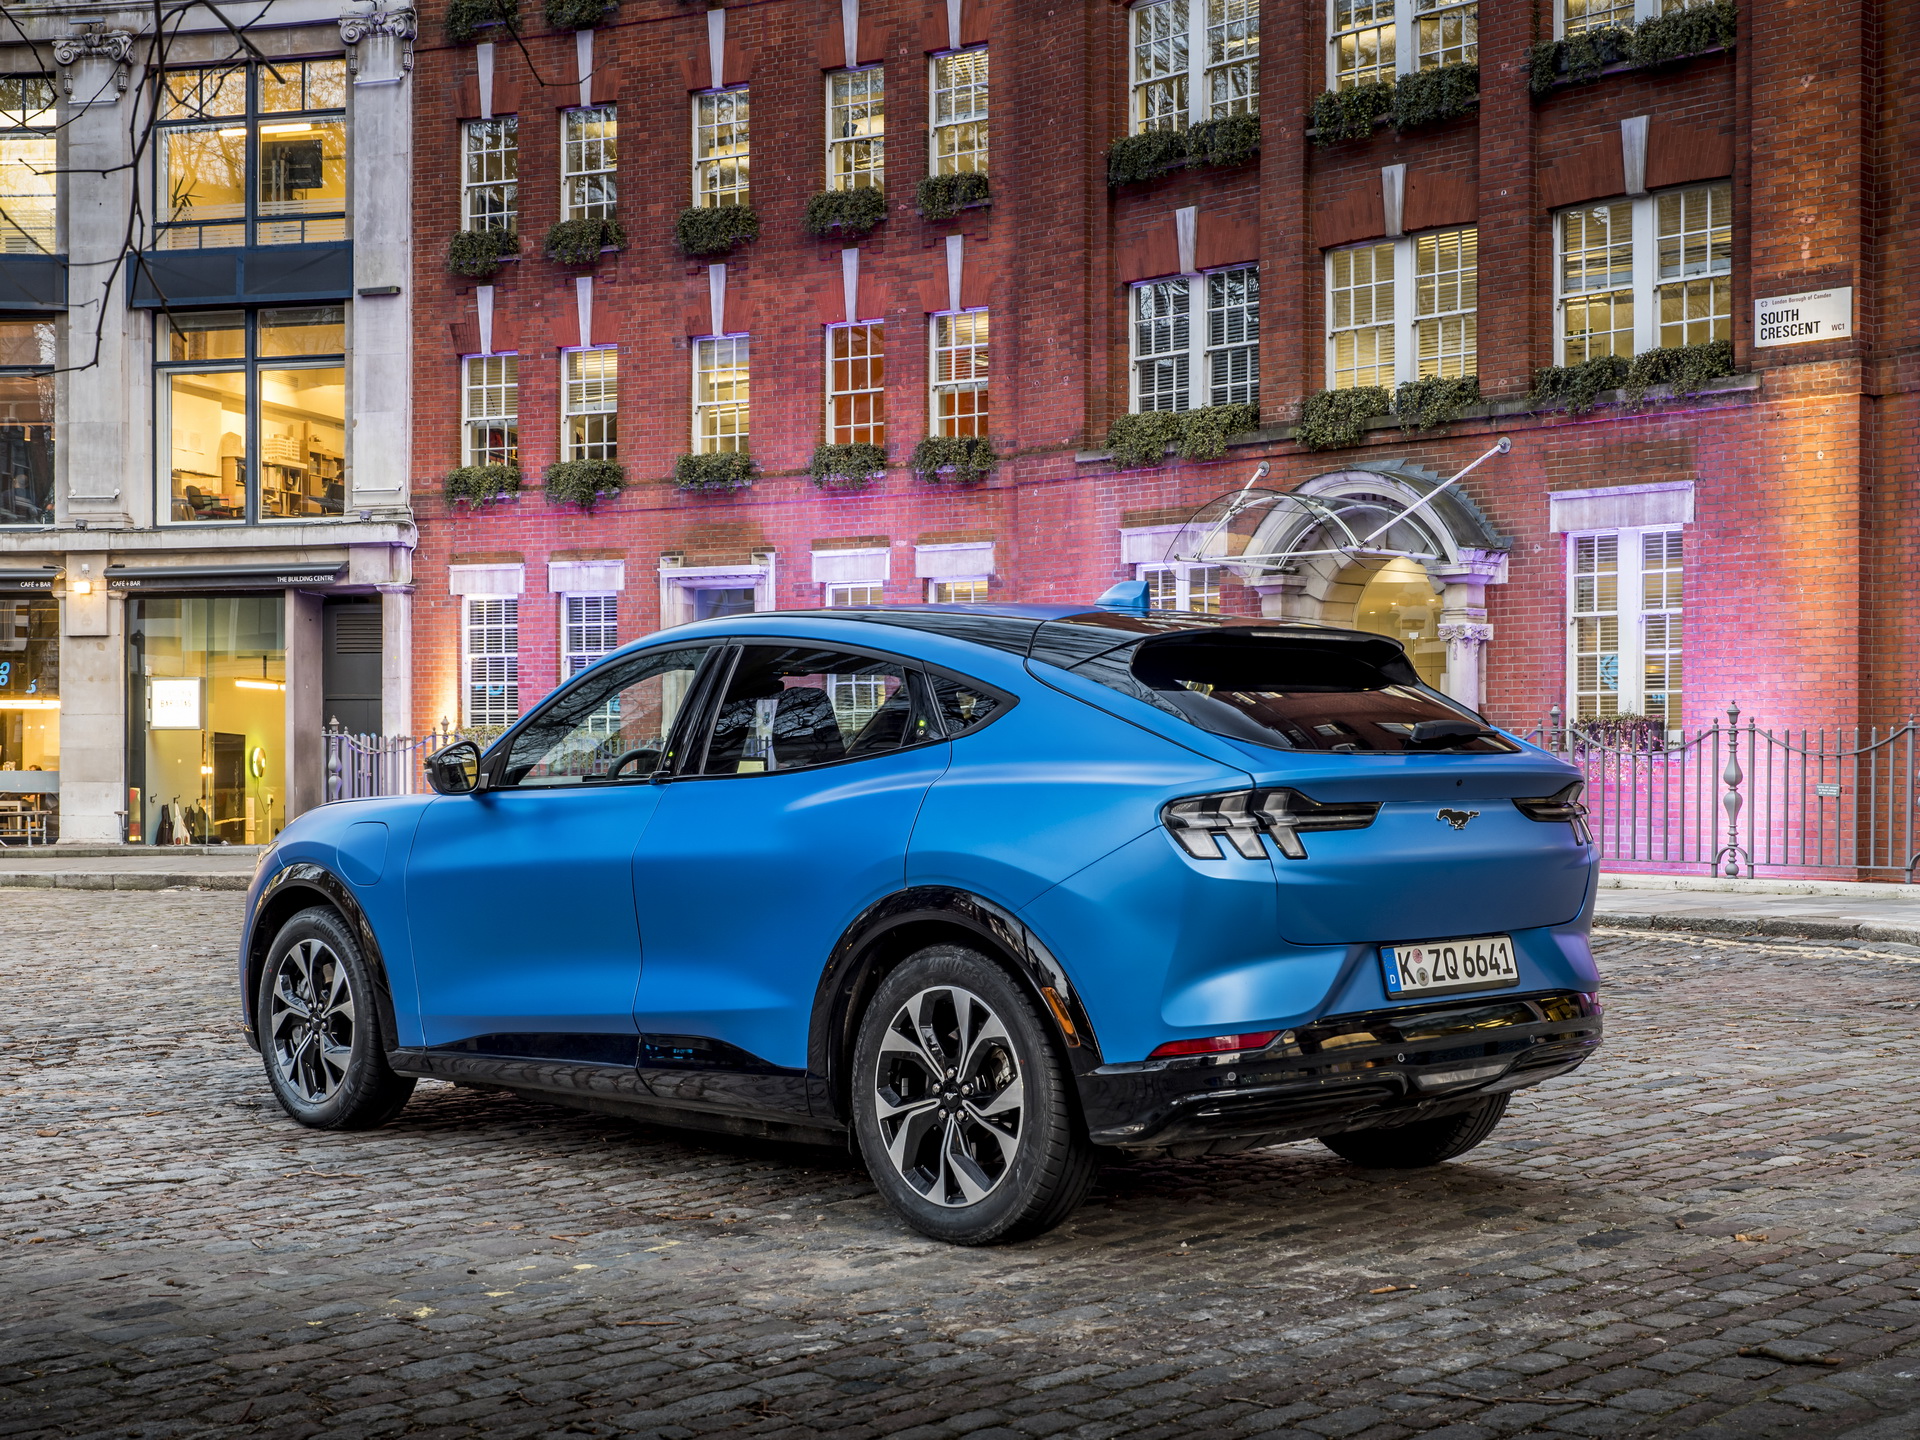 euro-spec-ford-mustang-mach-e-electric-crossover-unveiled-with-600-km